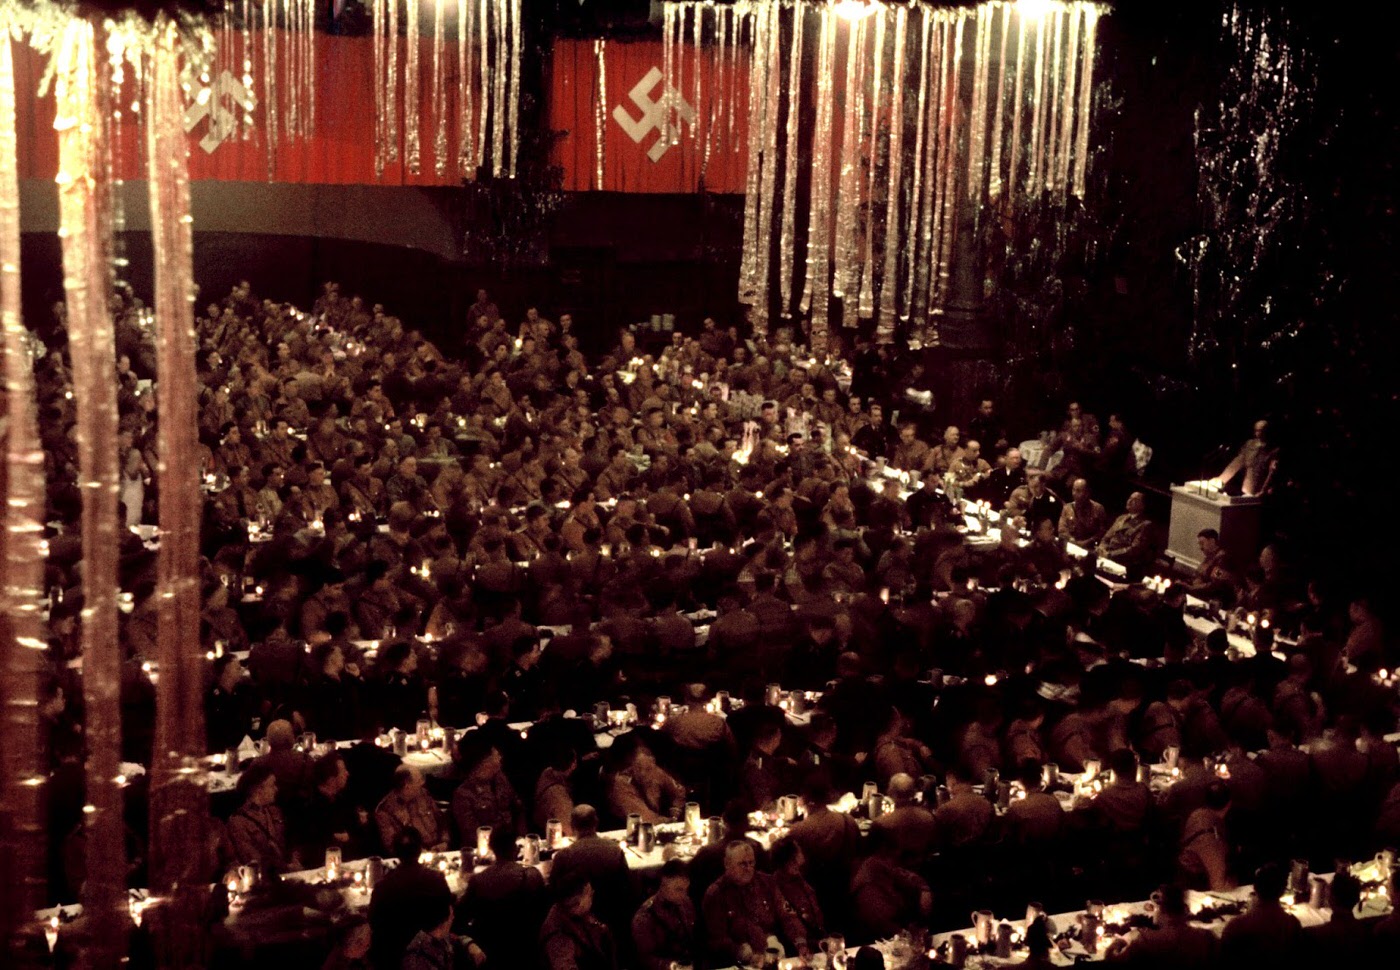 Scene from a Christmas party attended by Adolf Hitler and other Nazis.